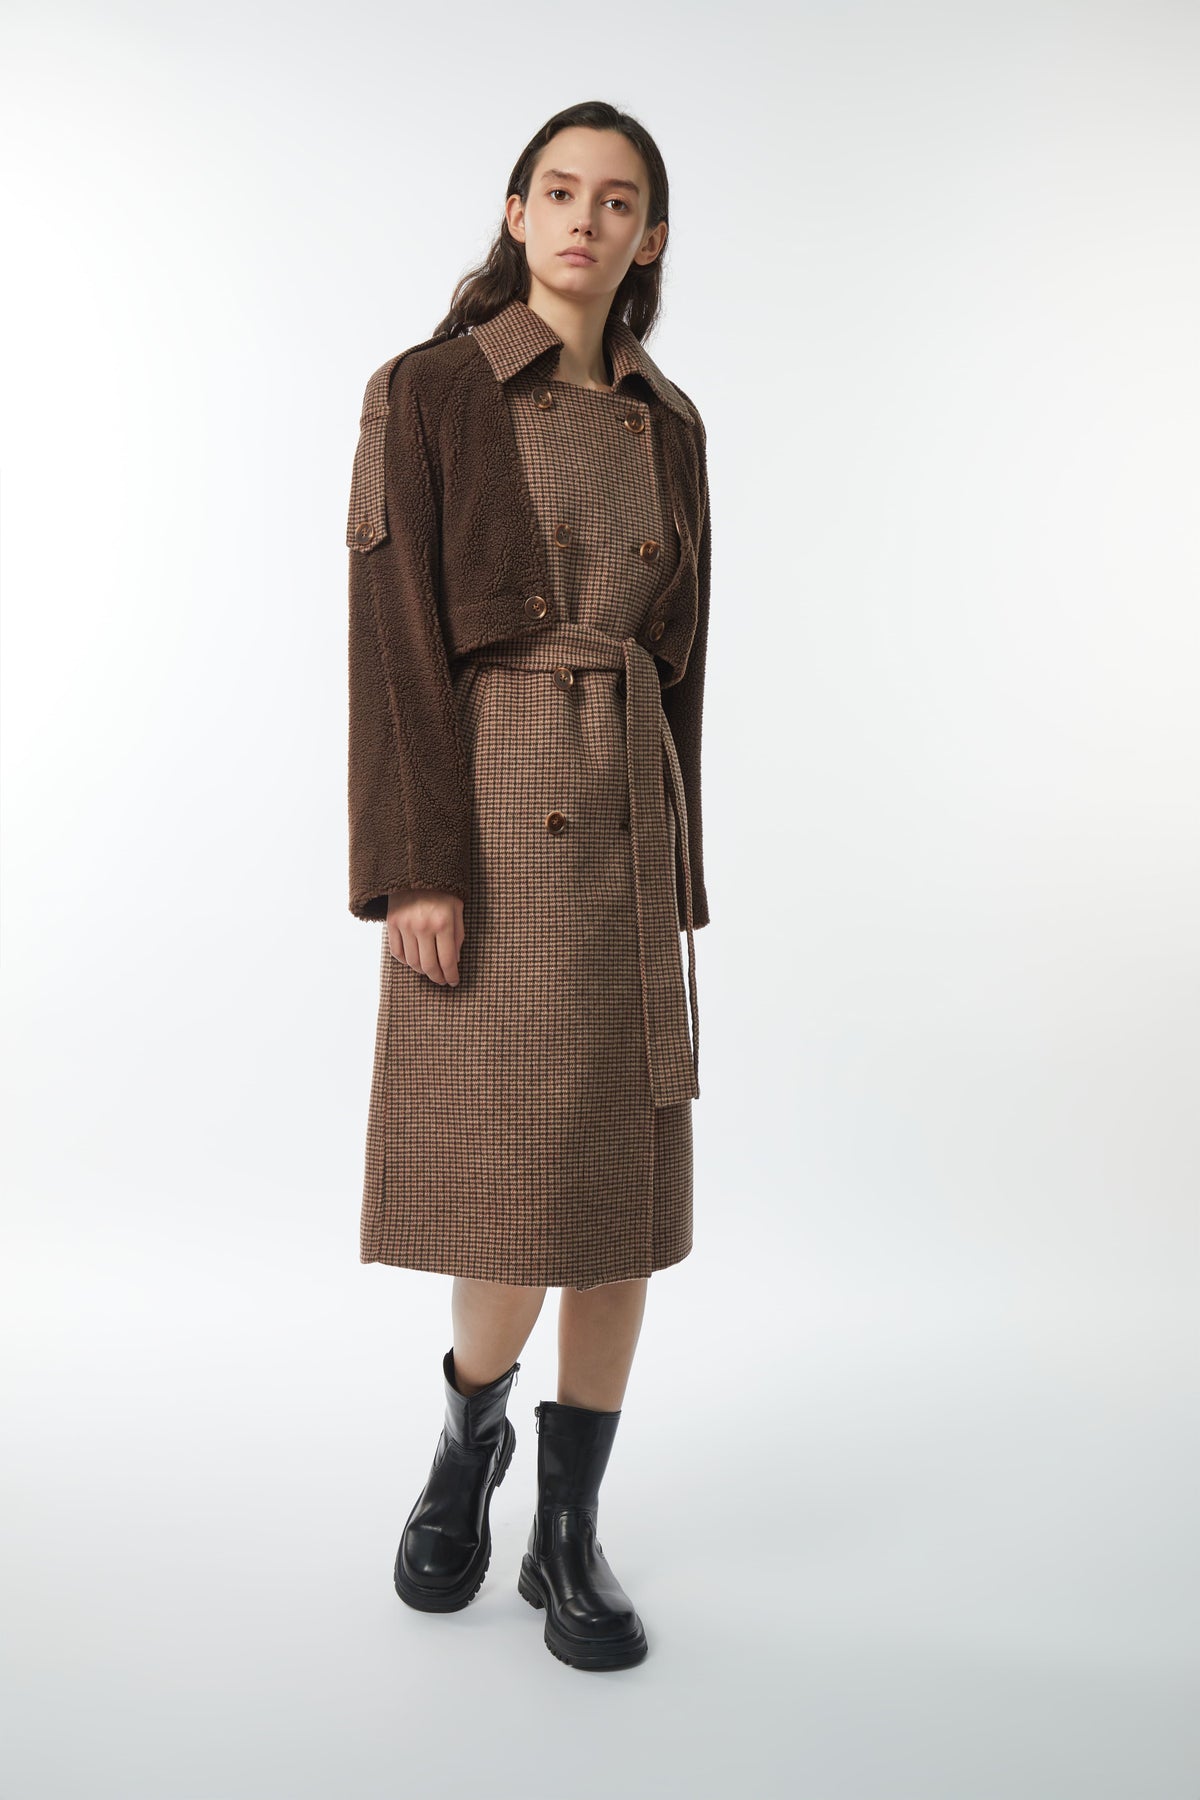 Seaton - Khaki patchwork double-breasted coat - By Quaint